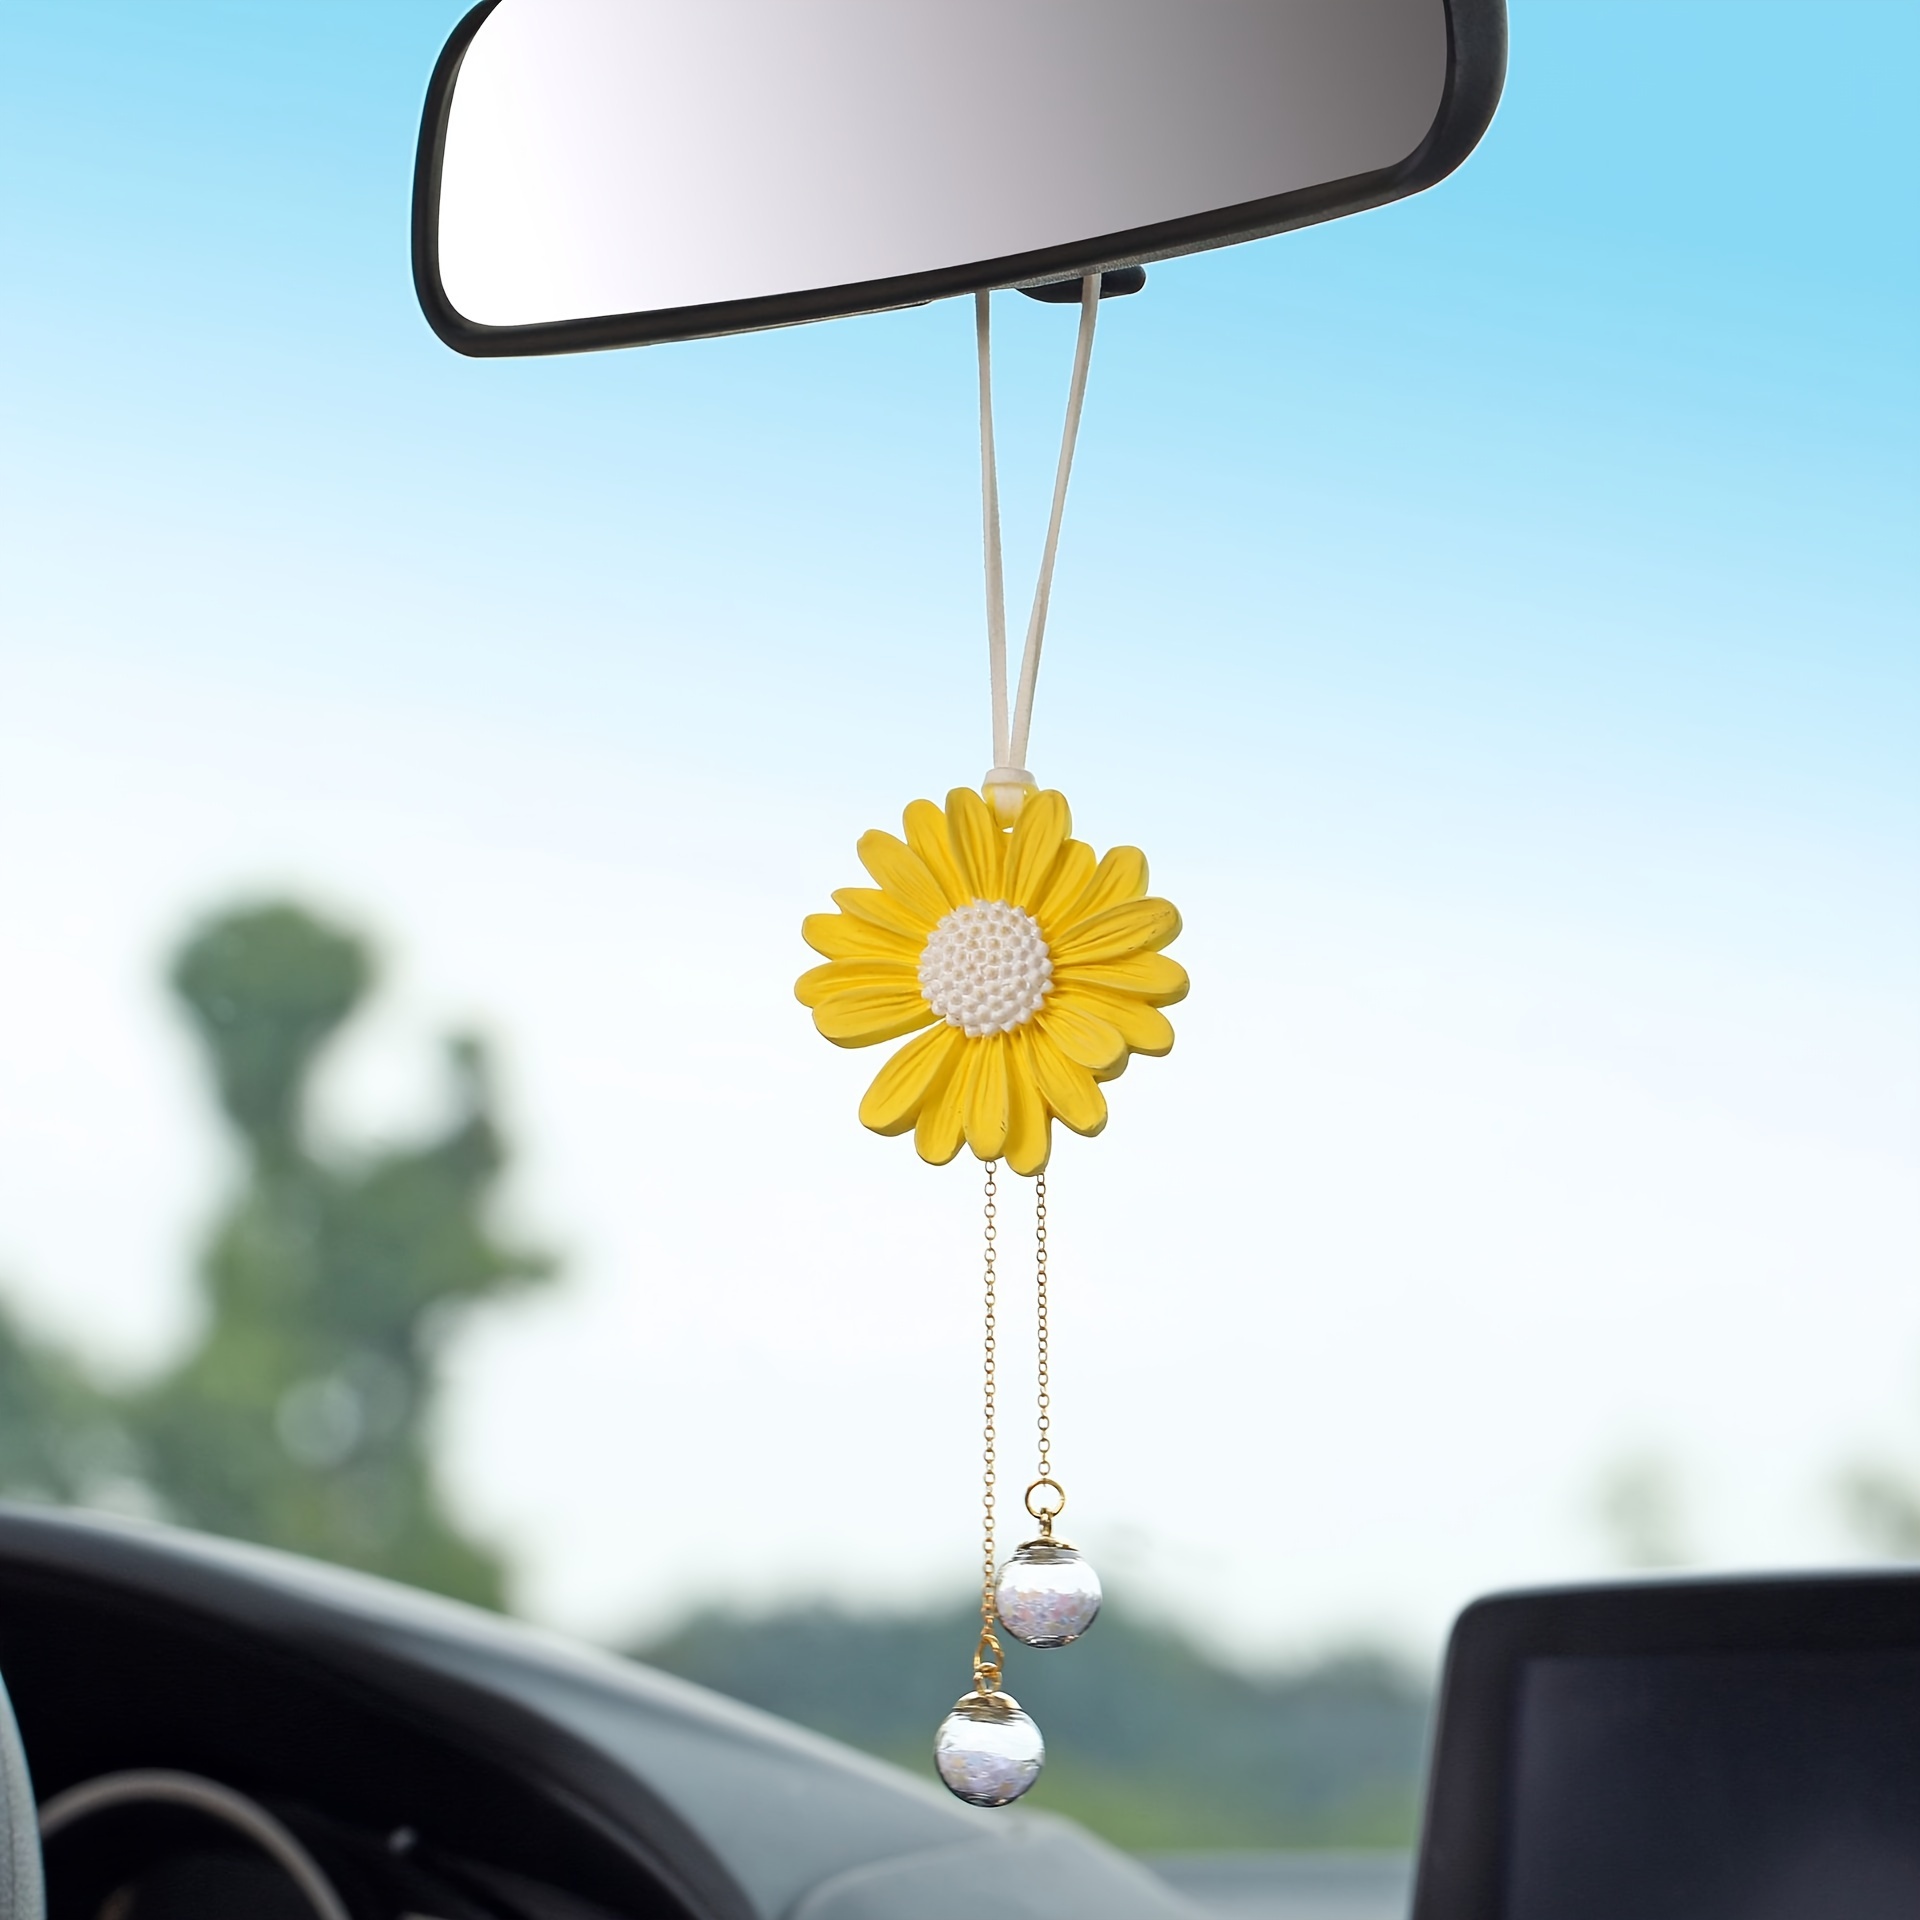 Towel+ Water Remover) Rearview Mirror Reflector Wipers - Temu